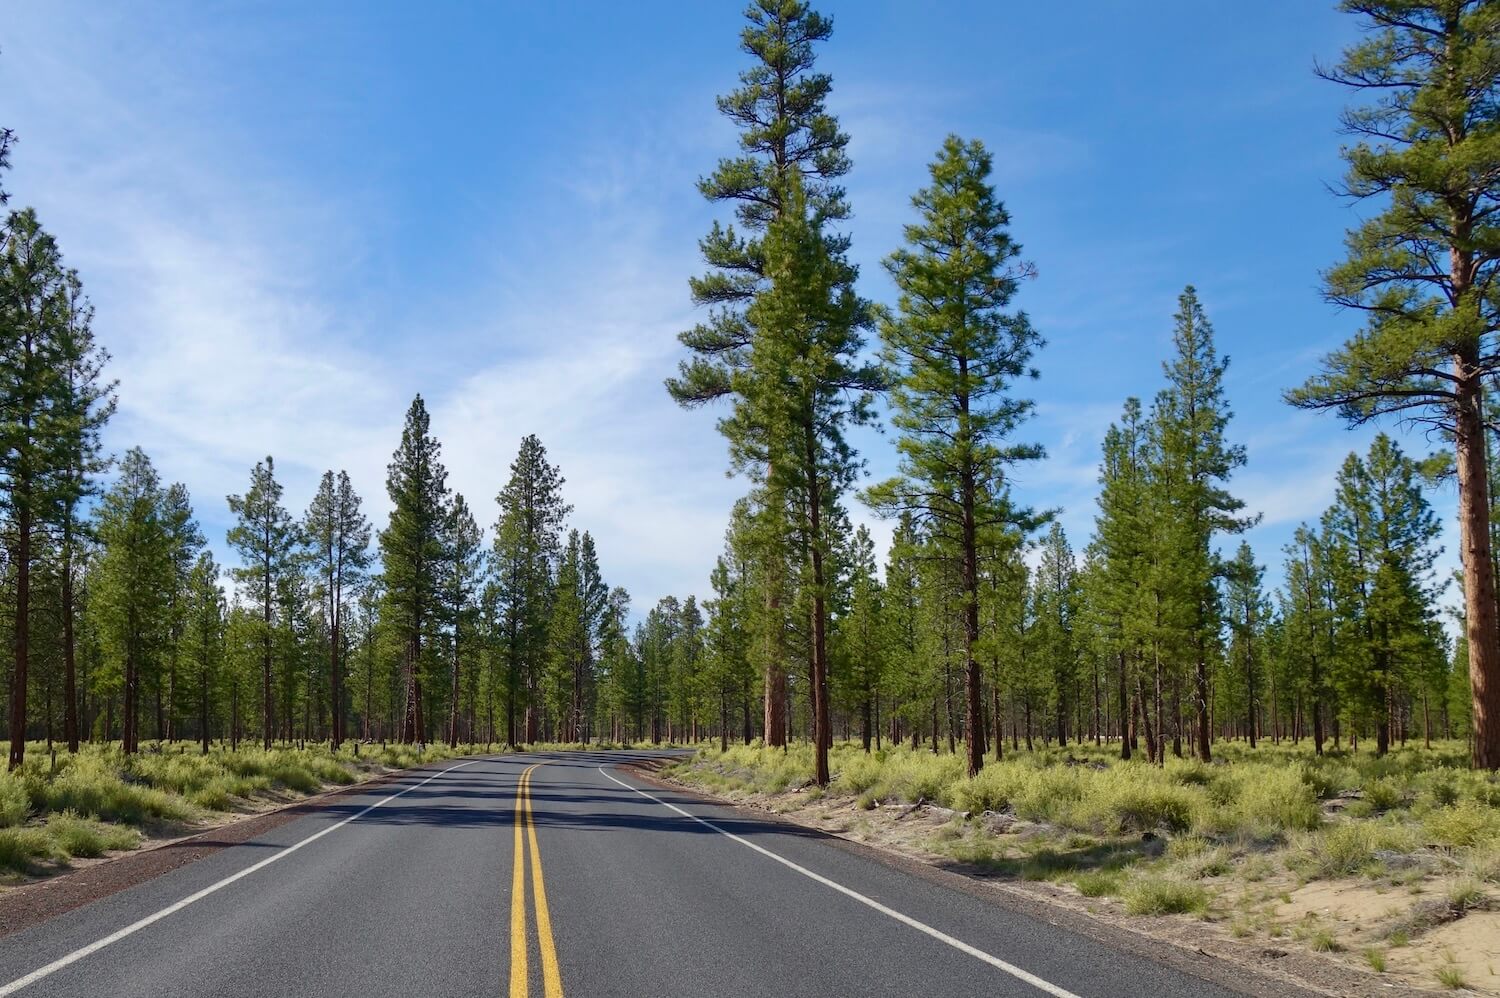 Ponderosa pine trees rise up from a grassy field along the road, which has a double yellow line.  